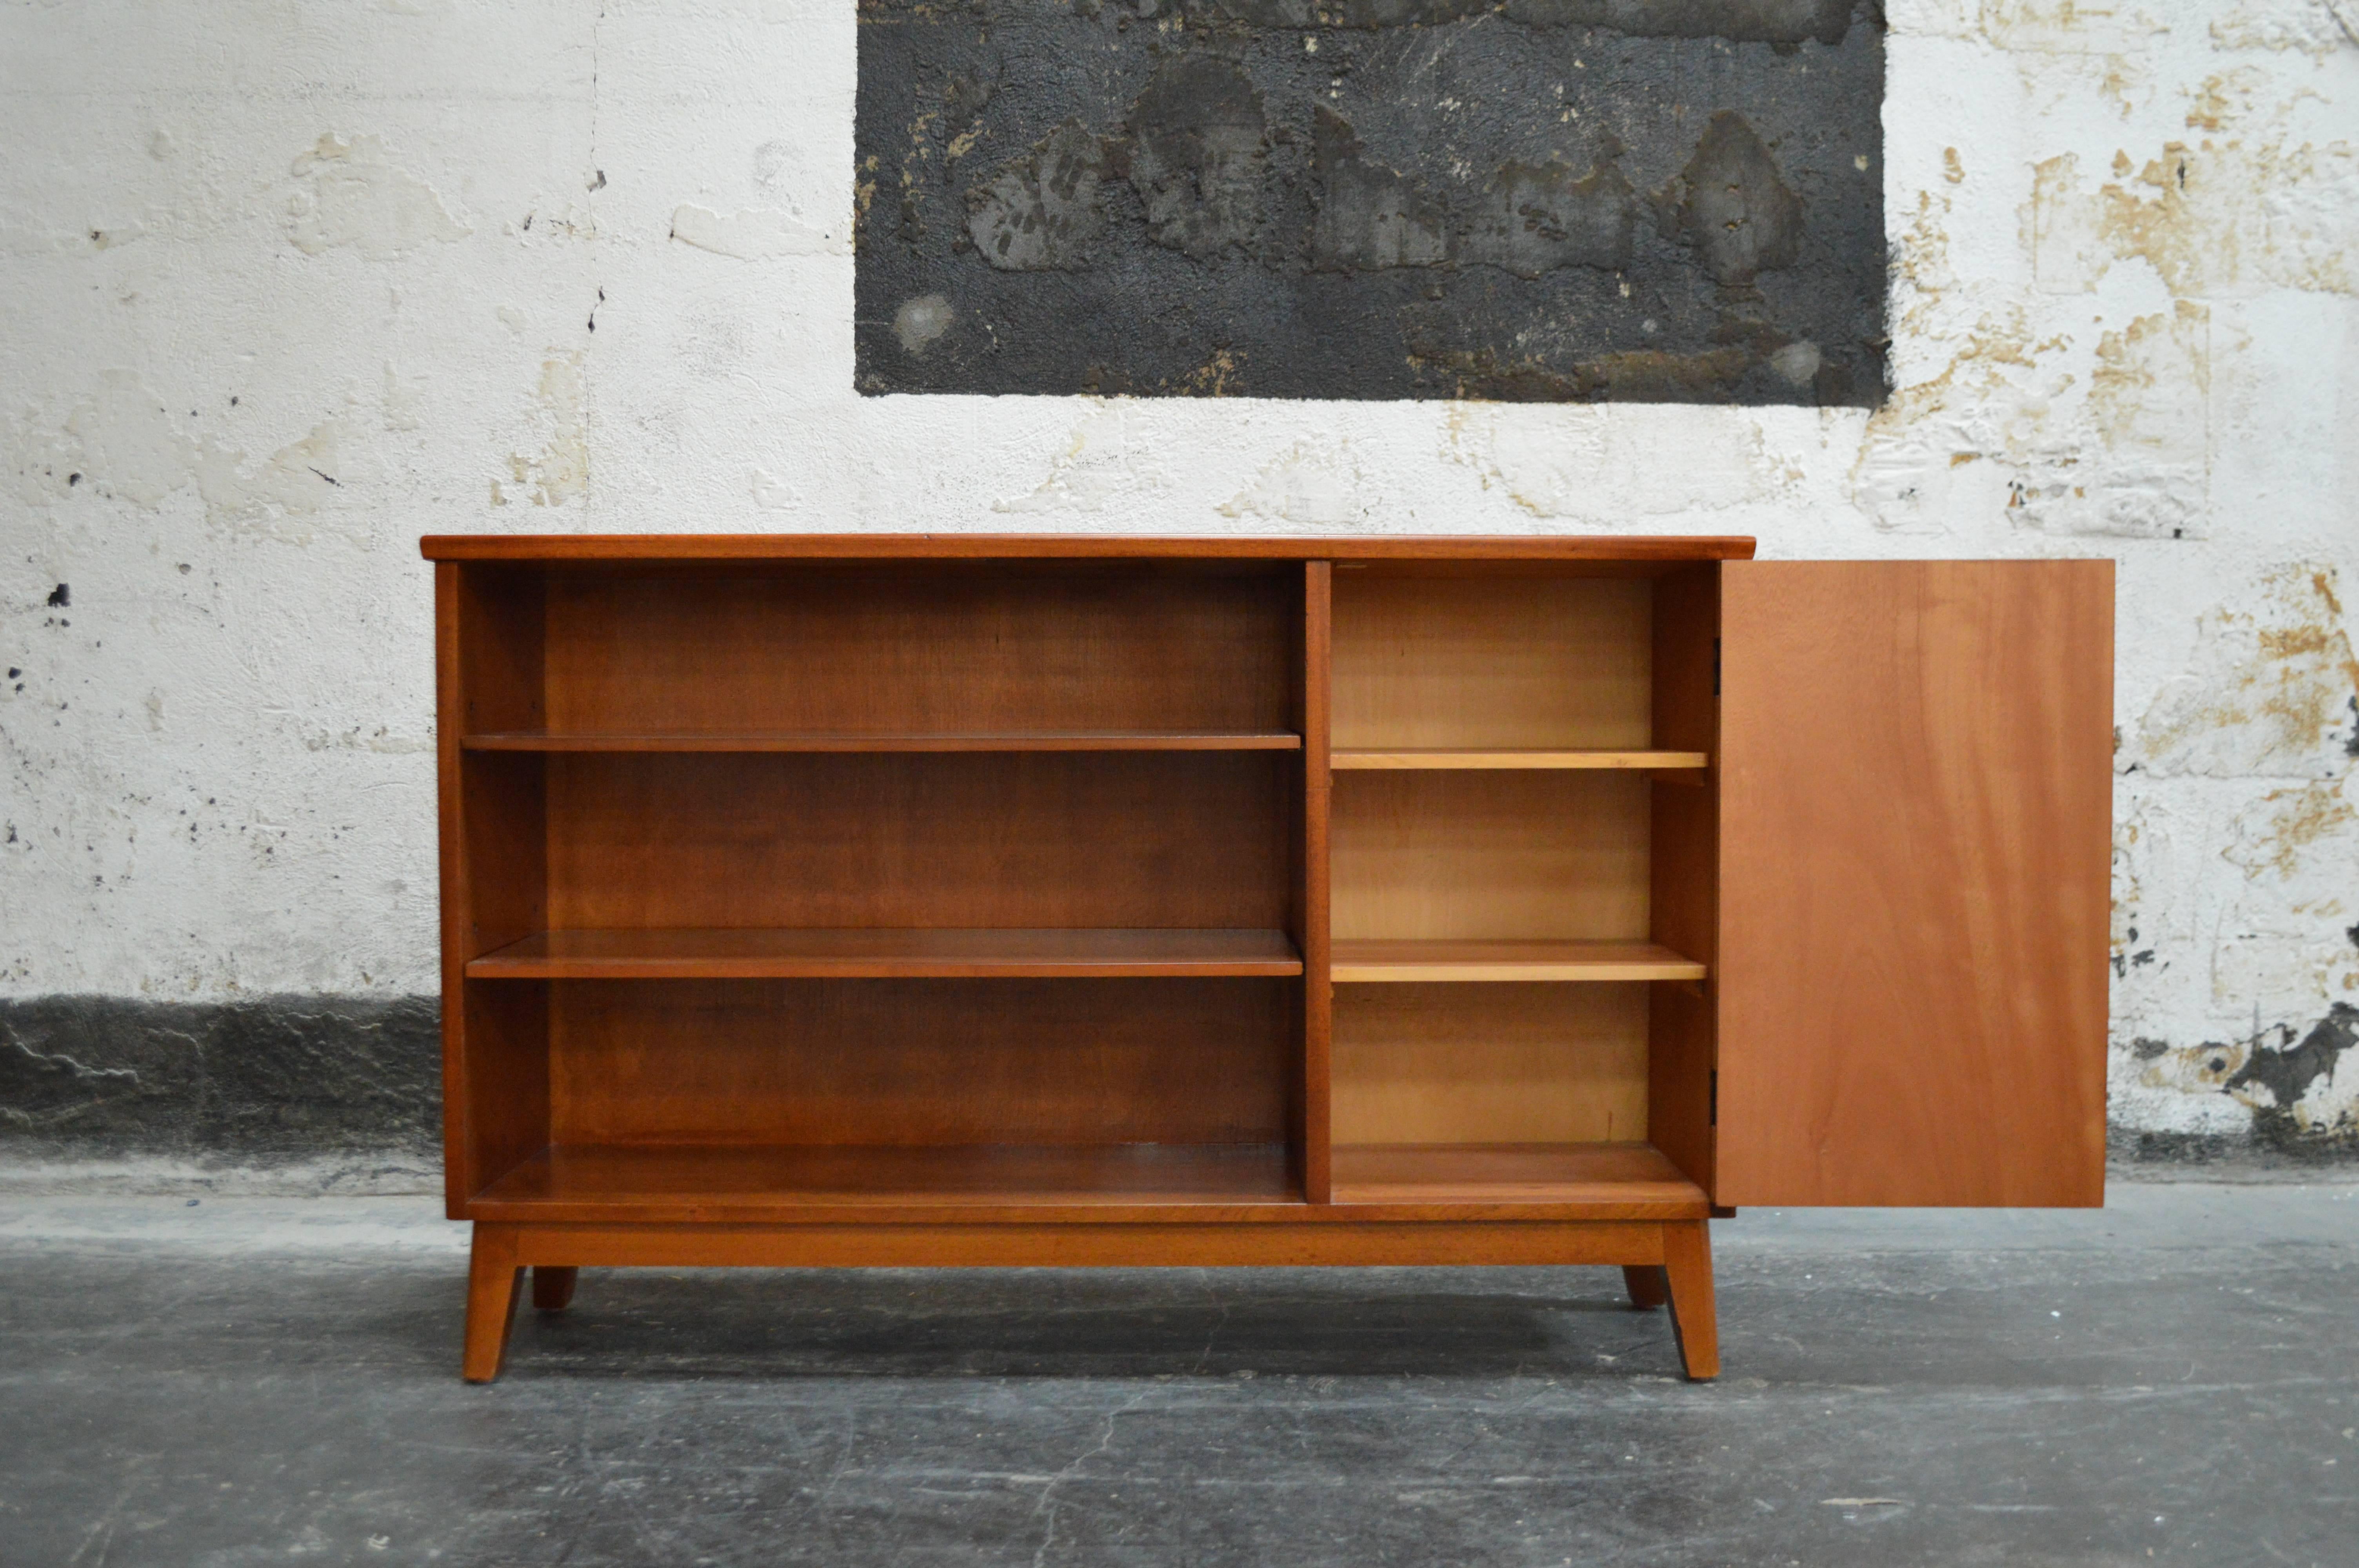 Handsome mahogany bookcase with a cabinet section for storage, newly restored. Adjustable shelves. Perfect as a slim console or stand for a flatscreen TV.